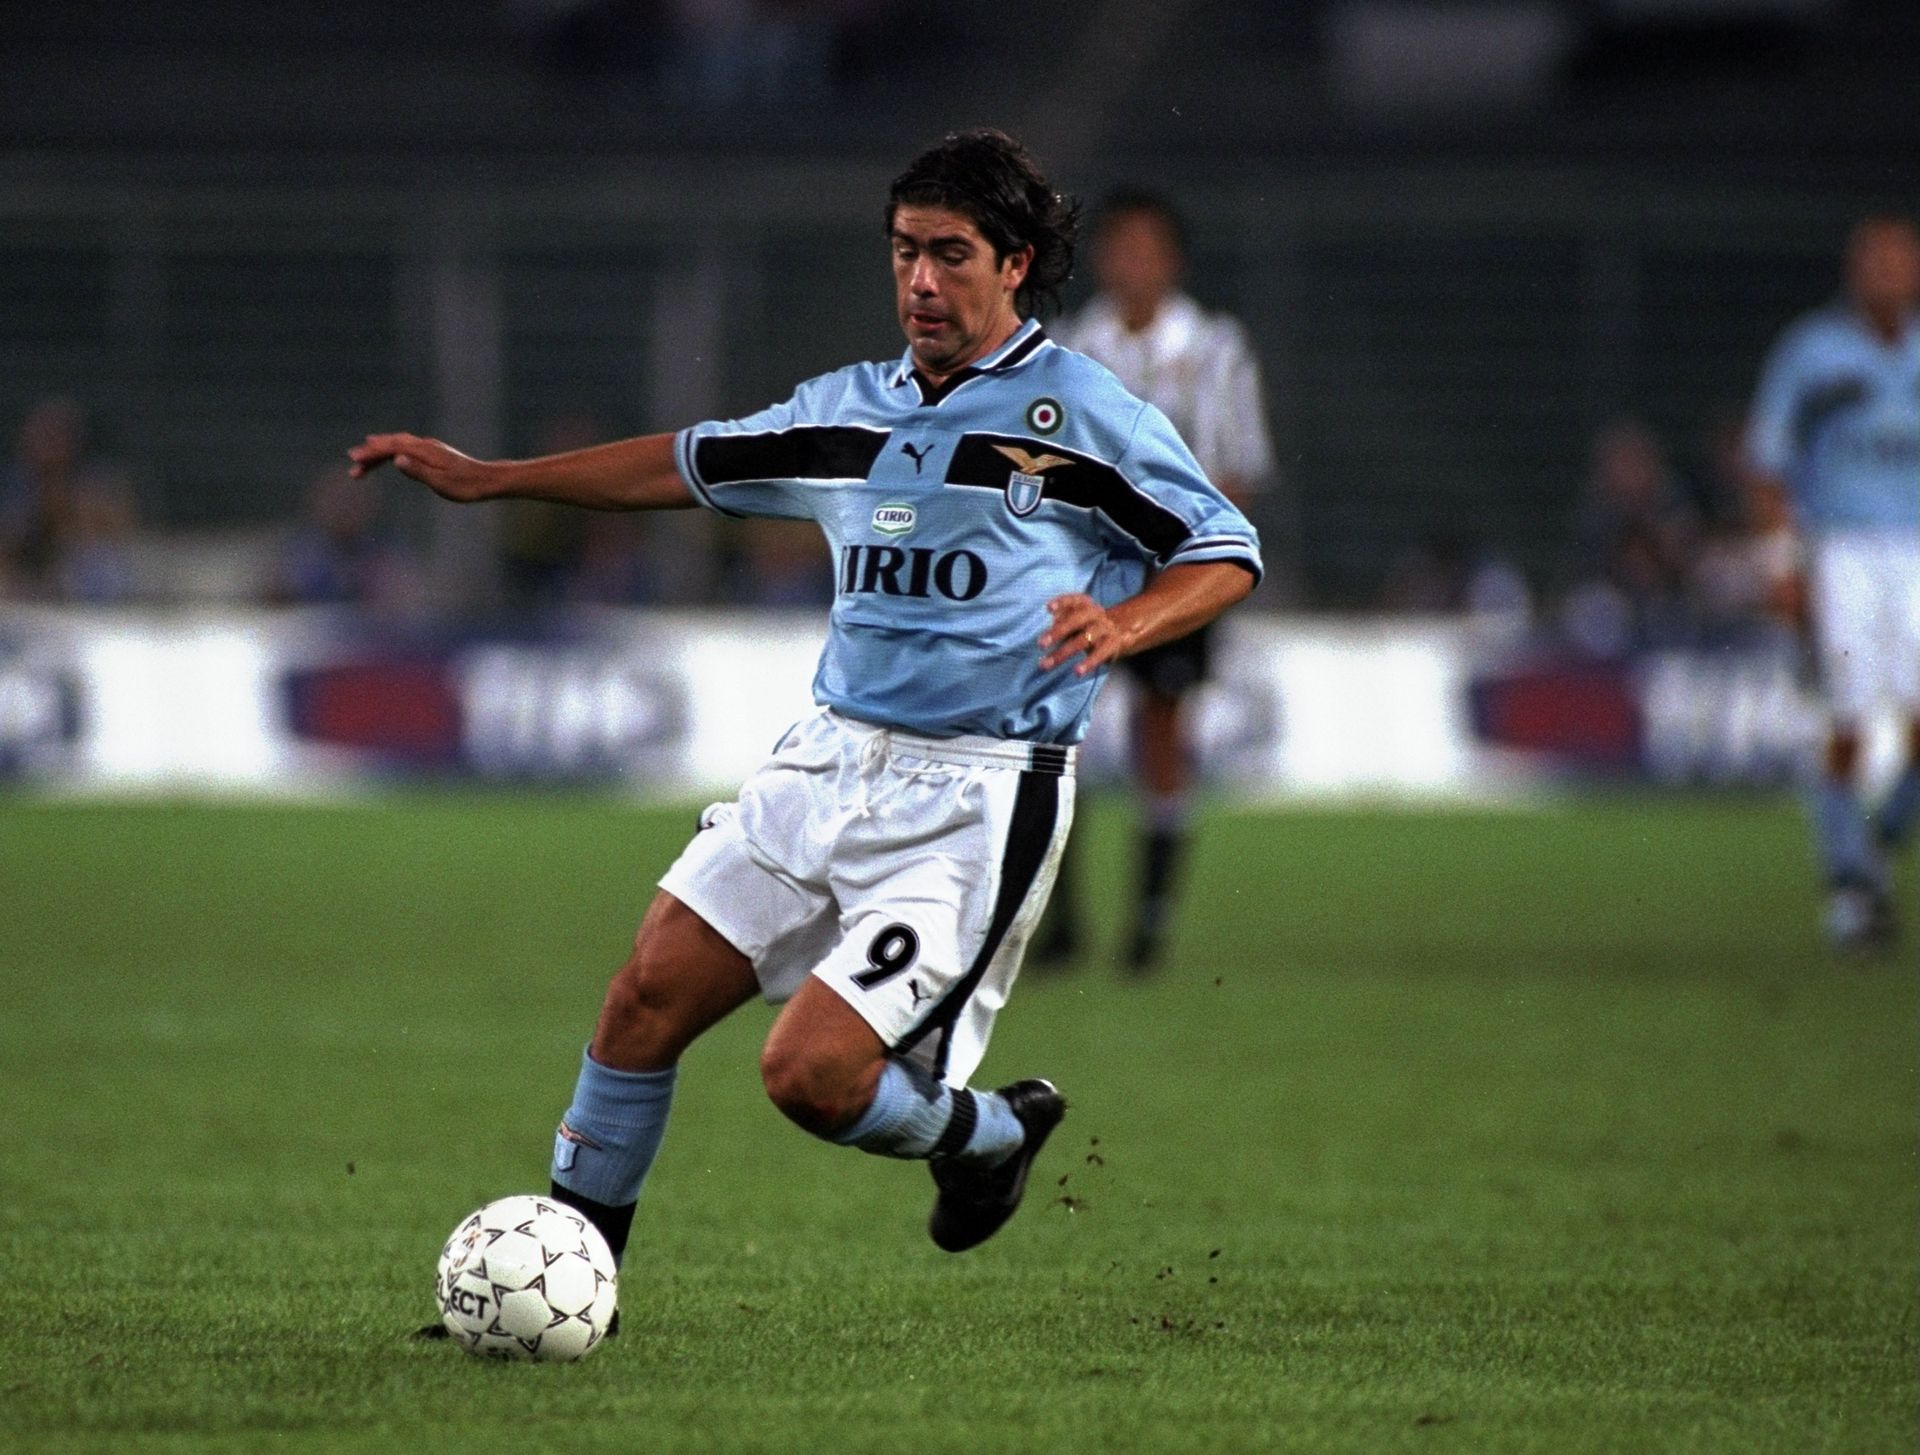 <p>                     After impressive spells at Universidad de Chile and River Plate, Marcelo Salas signed for Lazio in February 1998 in a €17.5 million deal which made him the fourth-most expensive player in the world at the time – behind only Ronaldo, Rivaldo and Denilson.                   </p>                                      <p>                     The Chilean striker went on to win a number of trophies with Lazio, including the Serie A title in 1999/2000, and netted 49 goals in 107 games before moving to Juventus in 2001. After a difficult spell in Turin, he returned to River in 2003.                    </p>